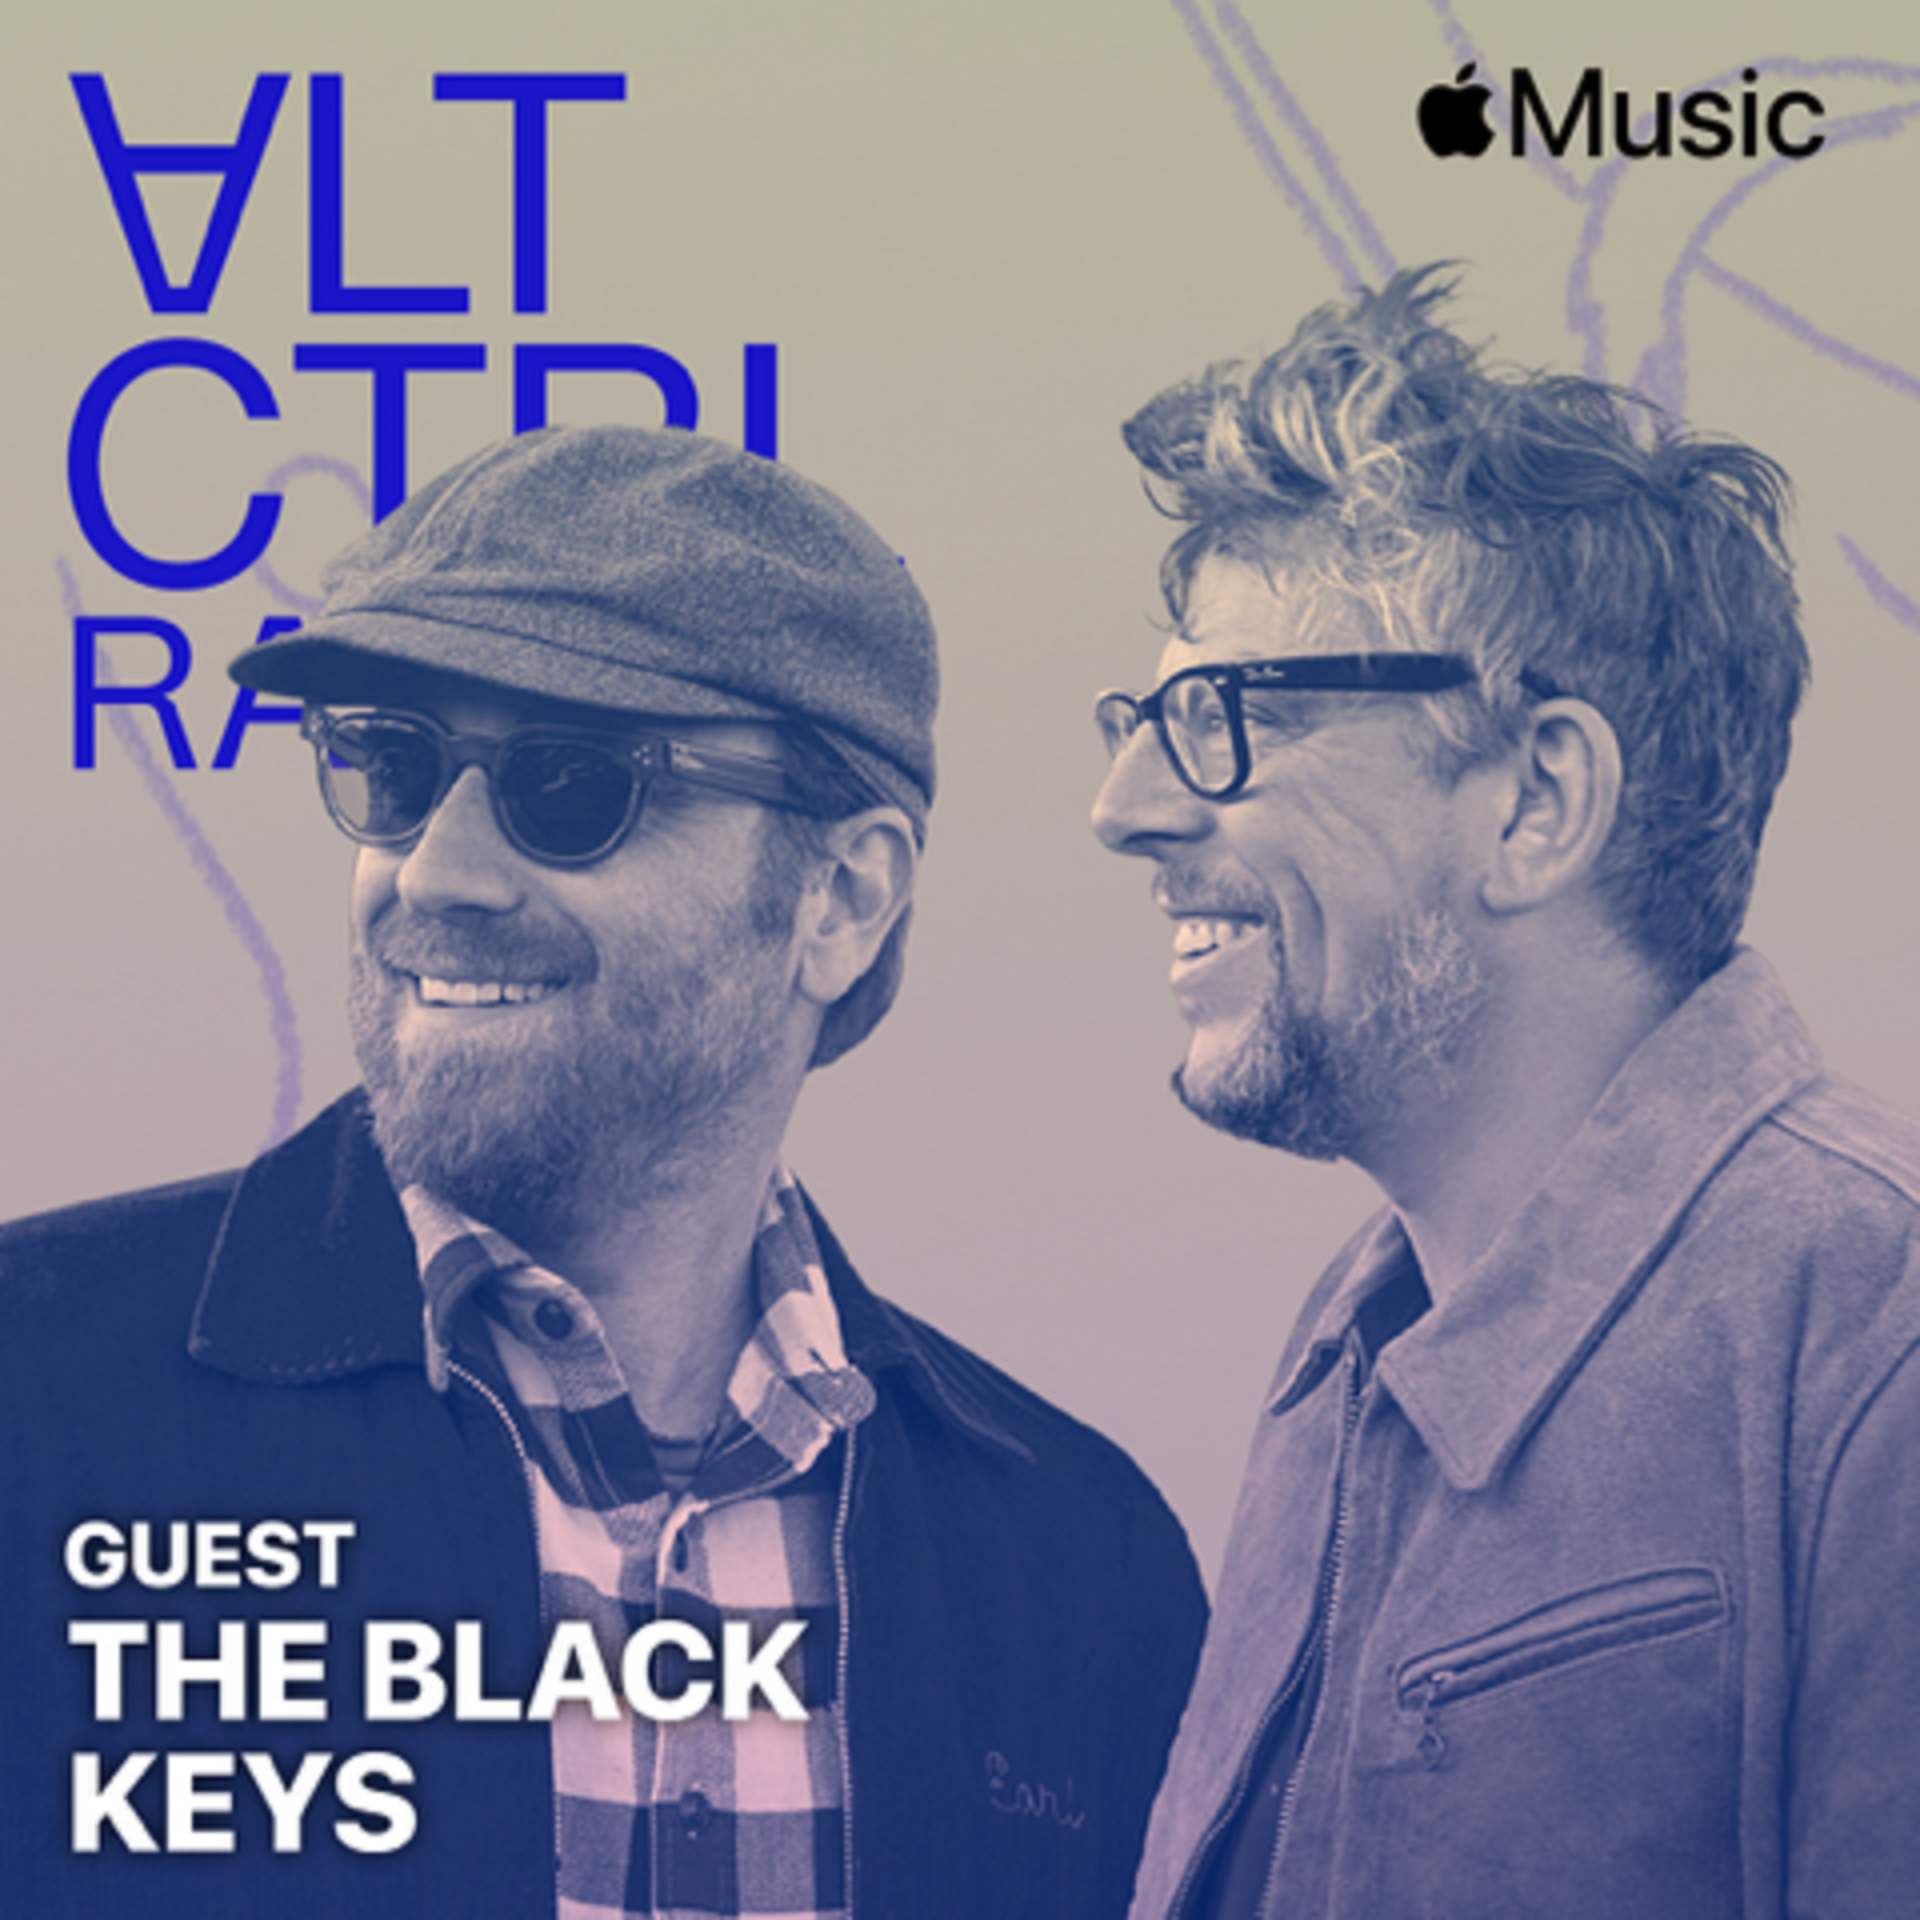 The Black Keys' Patrick Carney Tells Apple Music About The Band's Latest Single "Wild Child", Forthcoming Album, 20th Anniversary, and More